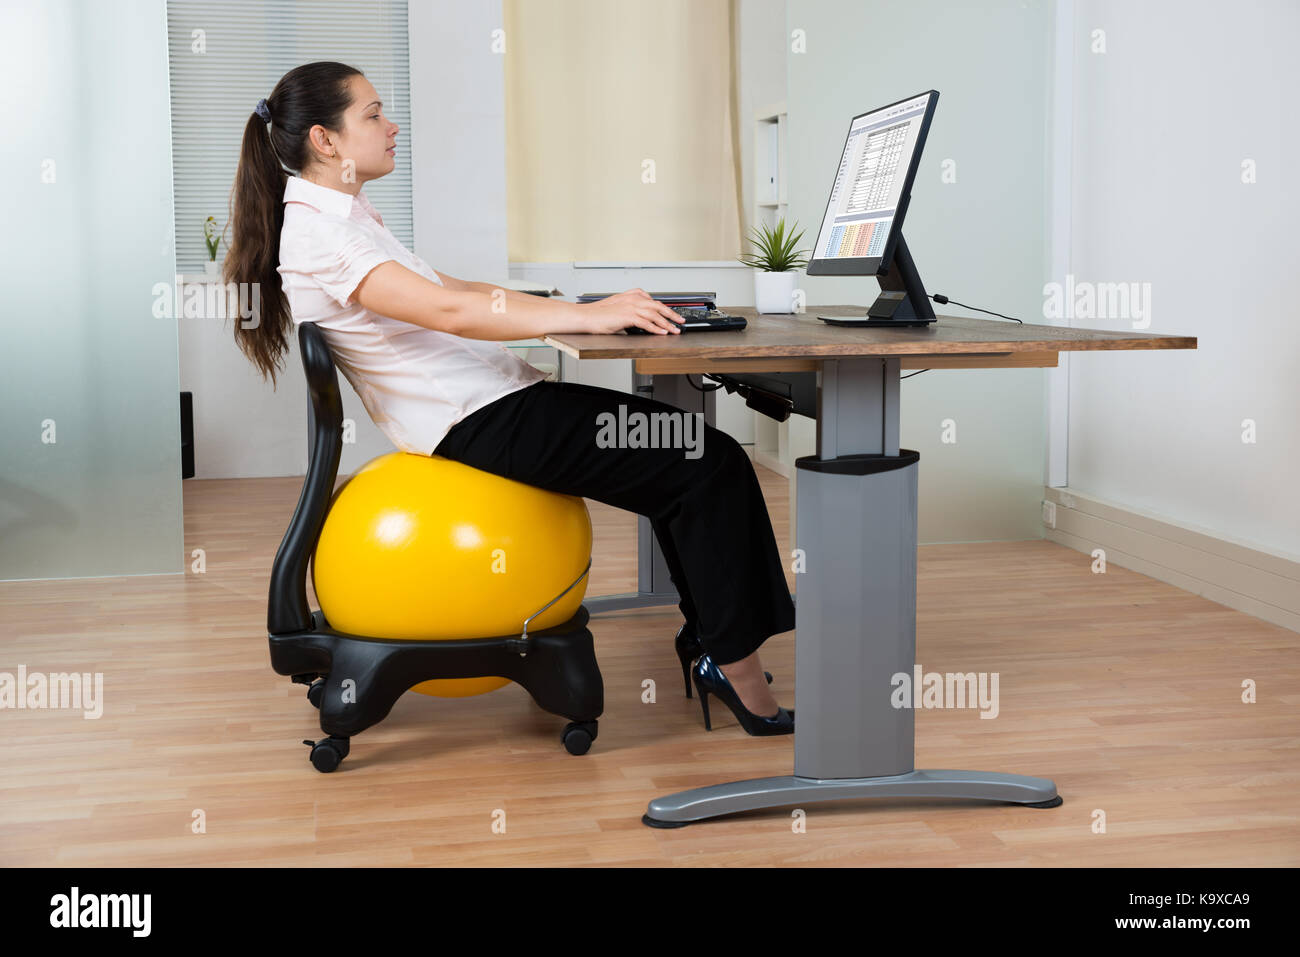 Businesswoman Leaning On Chair With Fitness Ball While Working On Computer Stock Photo